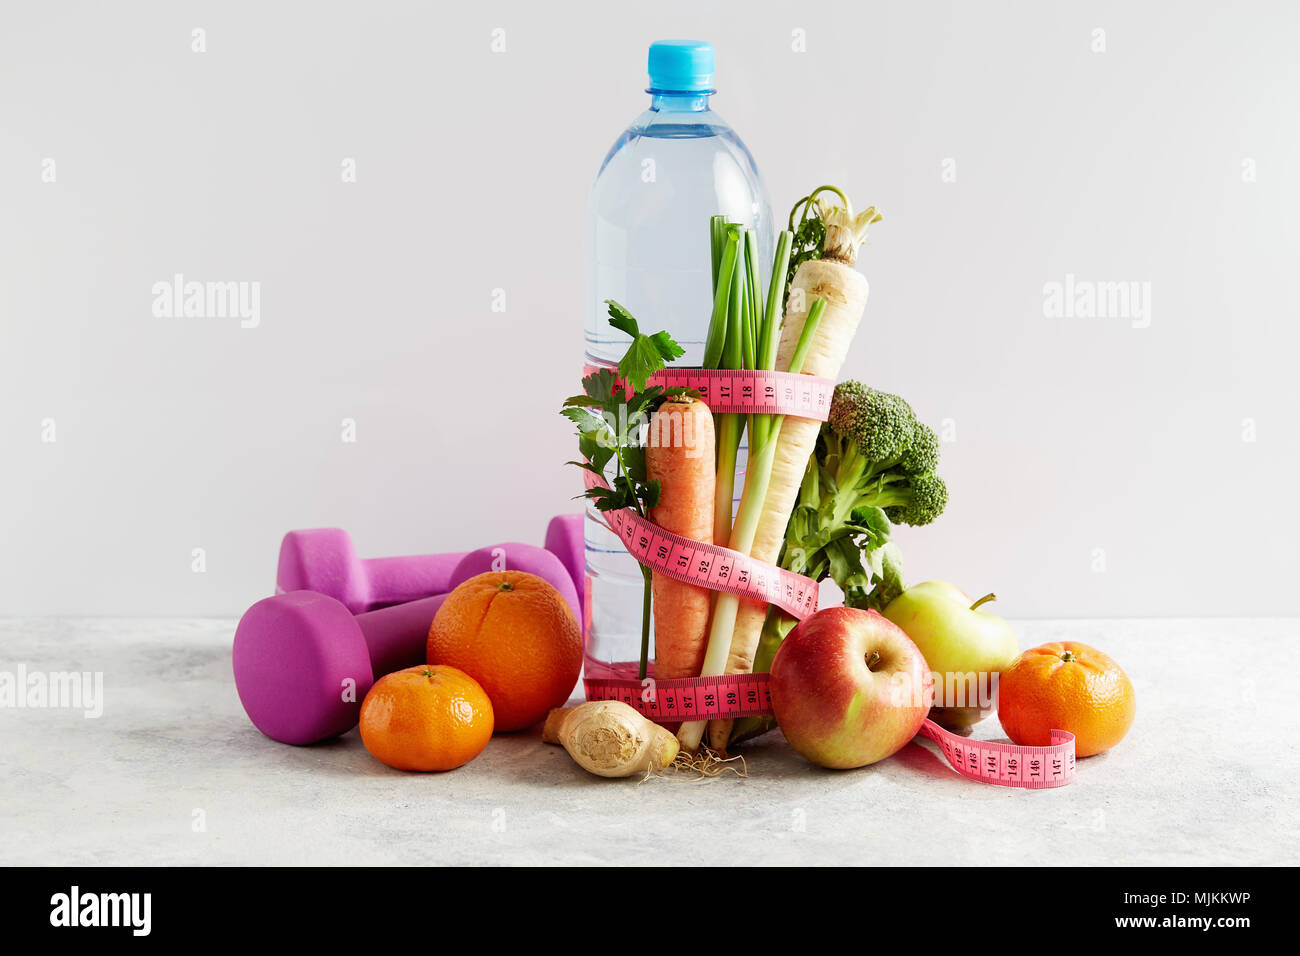 Bottle of water with a pink measuring tape, vegetables and fruit. Concept health, diet and nutrition. Stock Photo